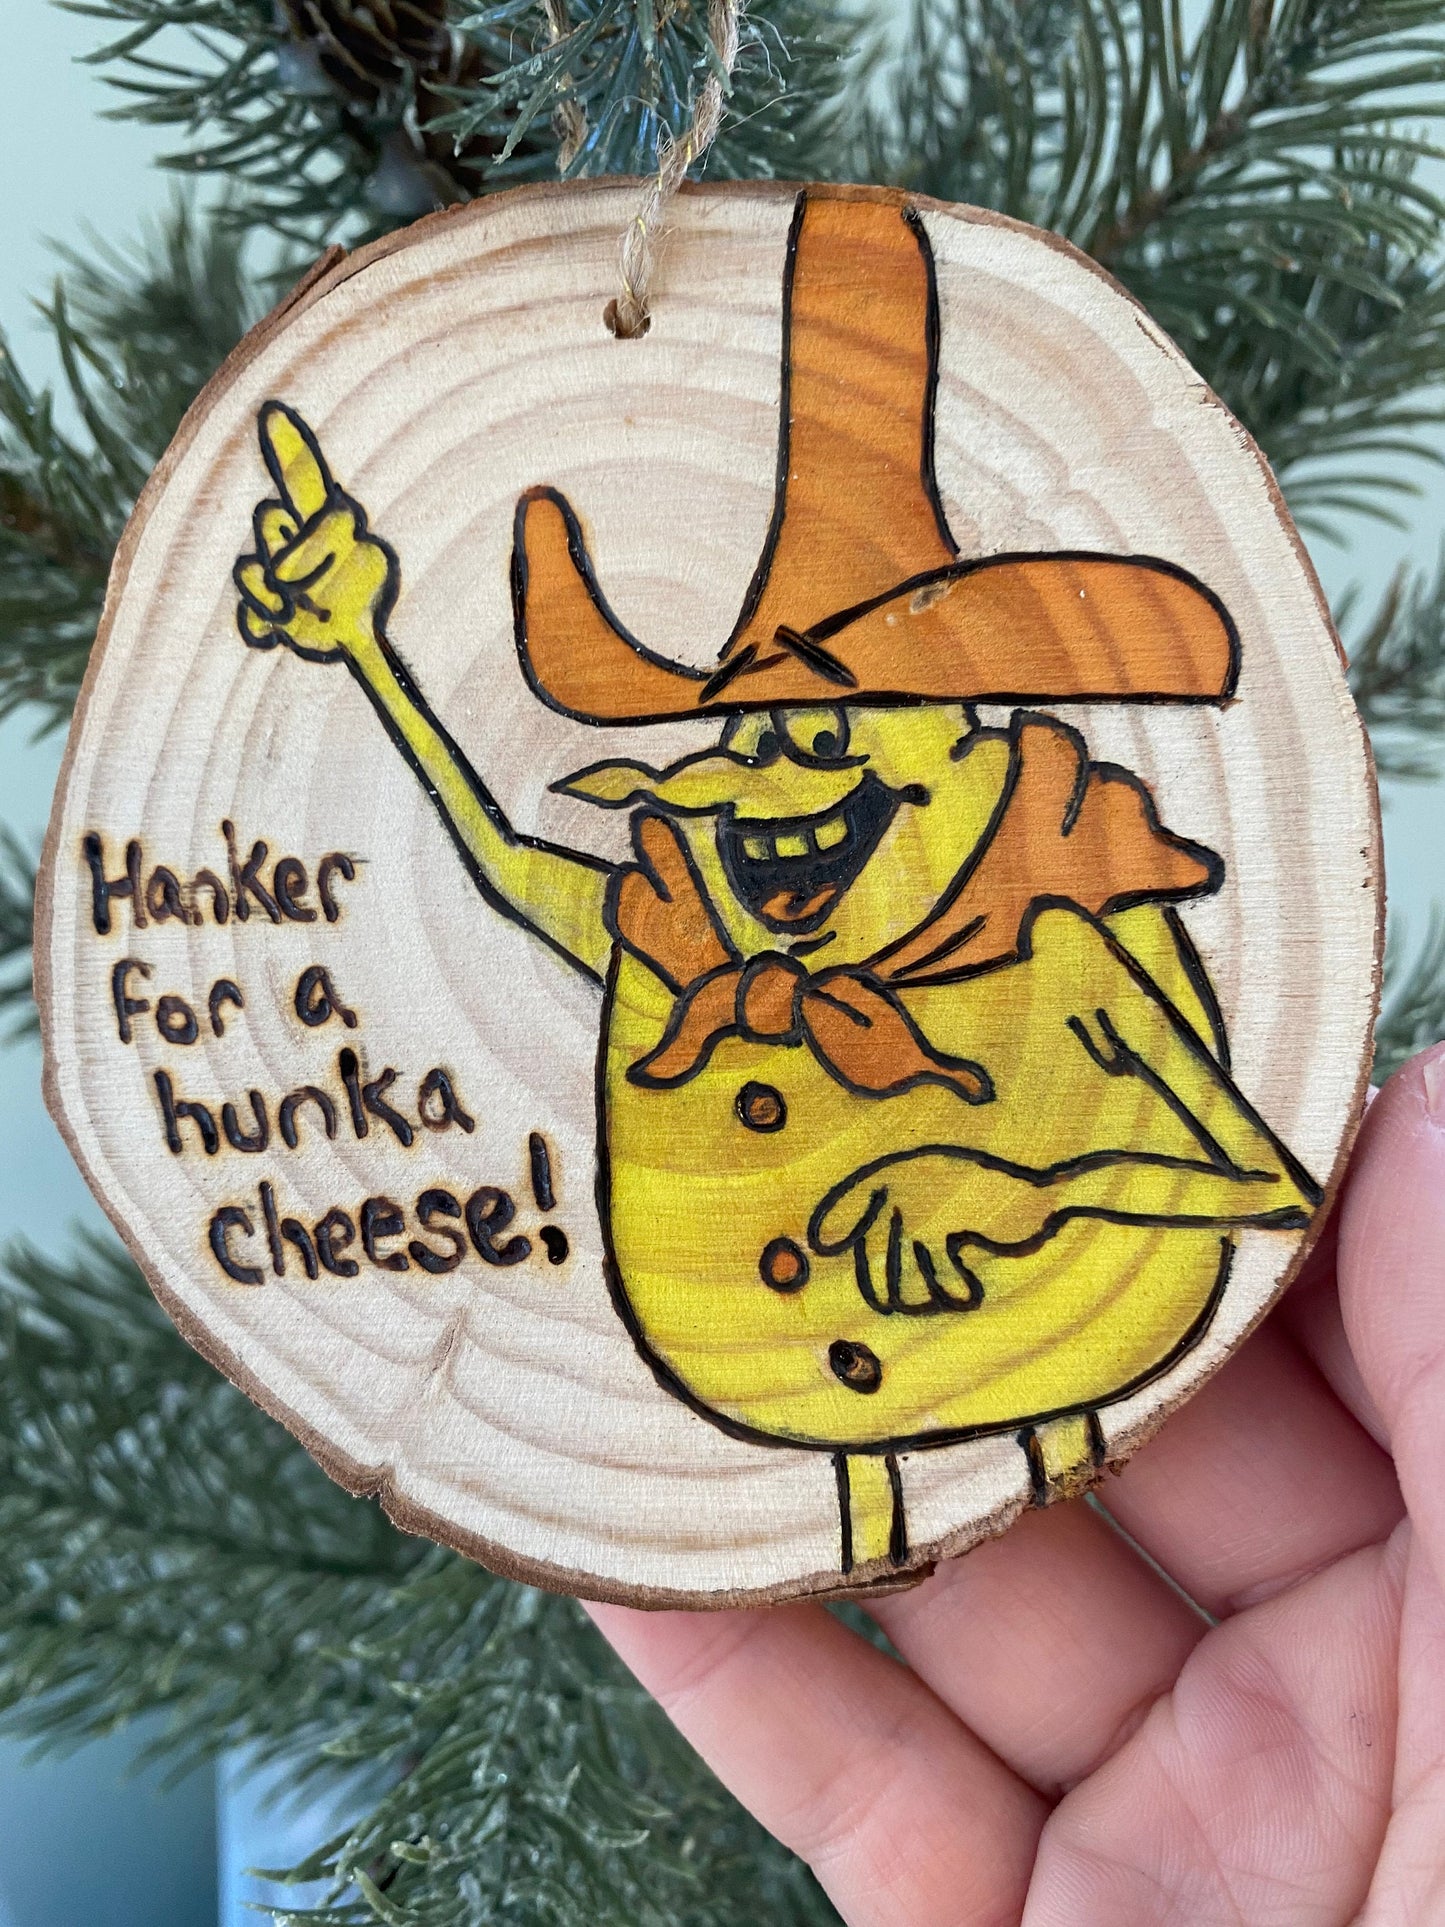 Hanker for a Hunka Cheese Timer the Cheese Guy ornament 70s cartoons Psa